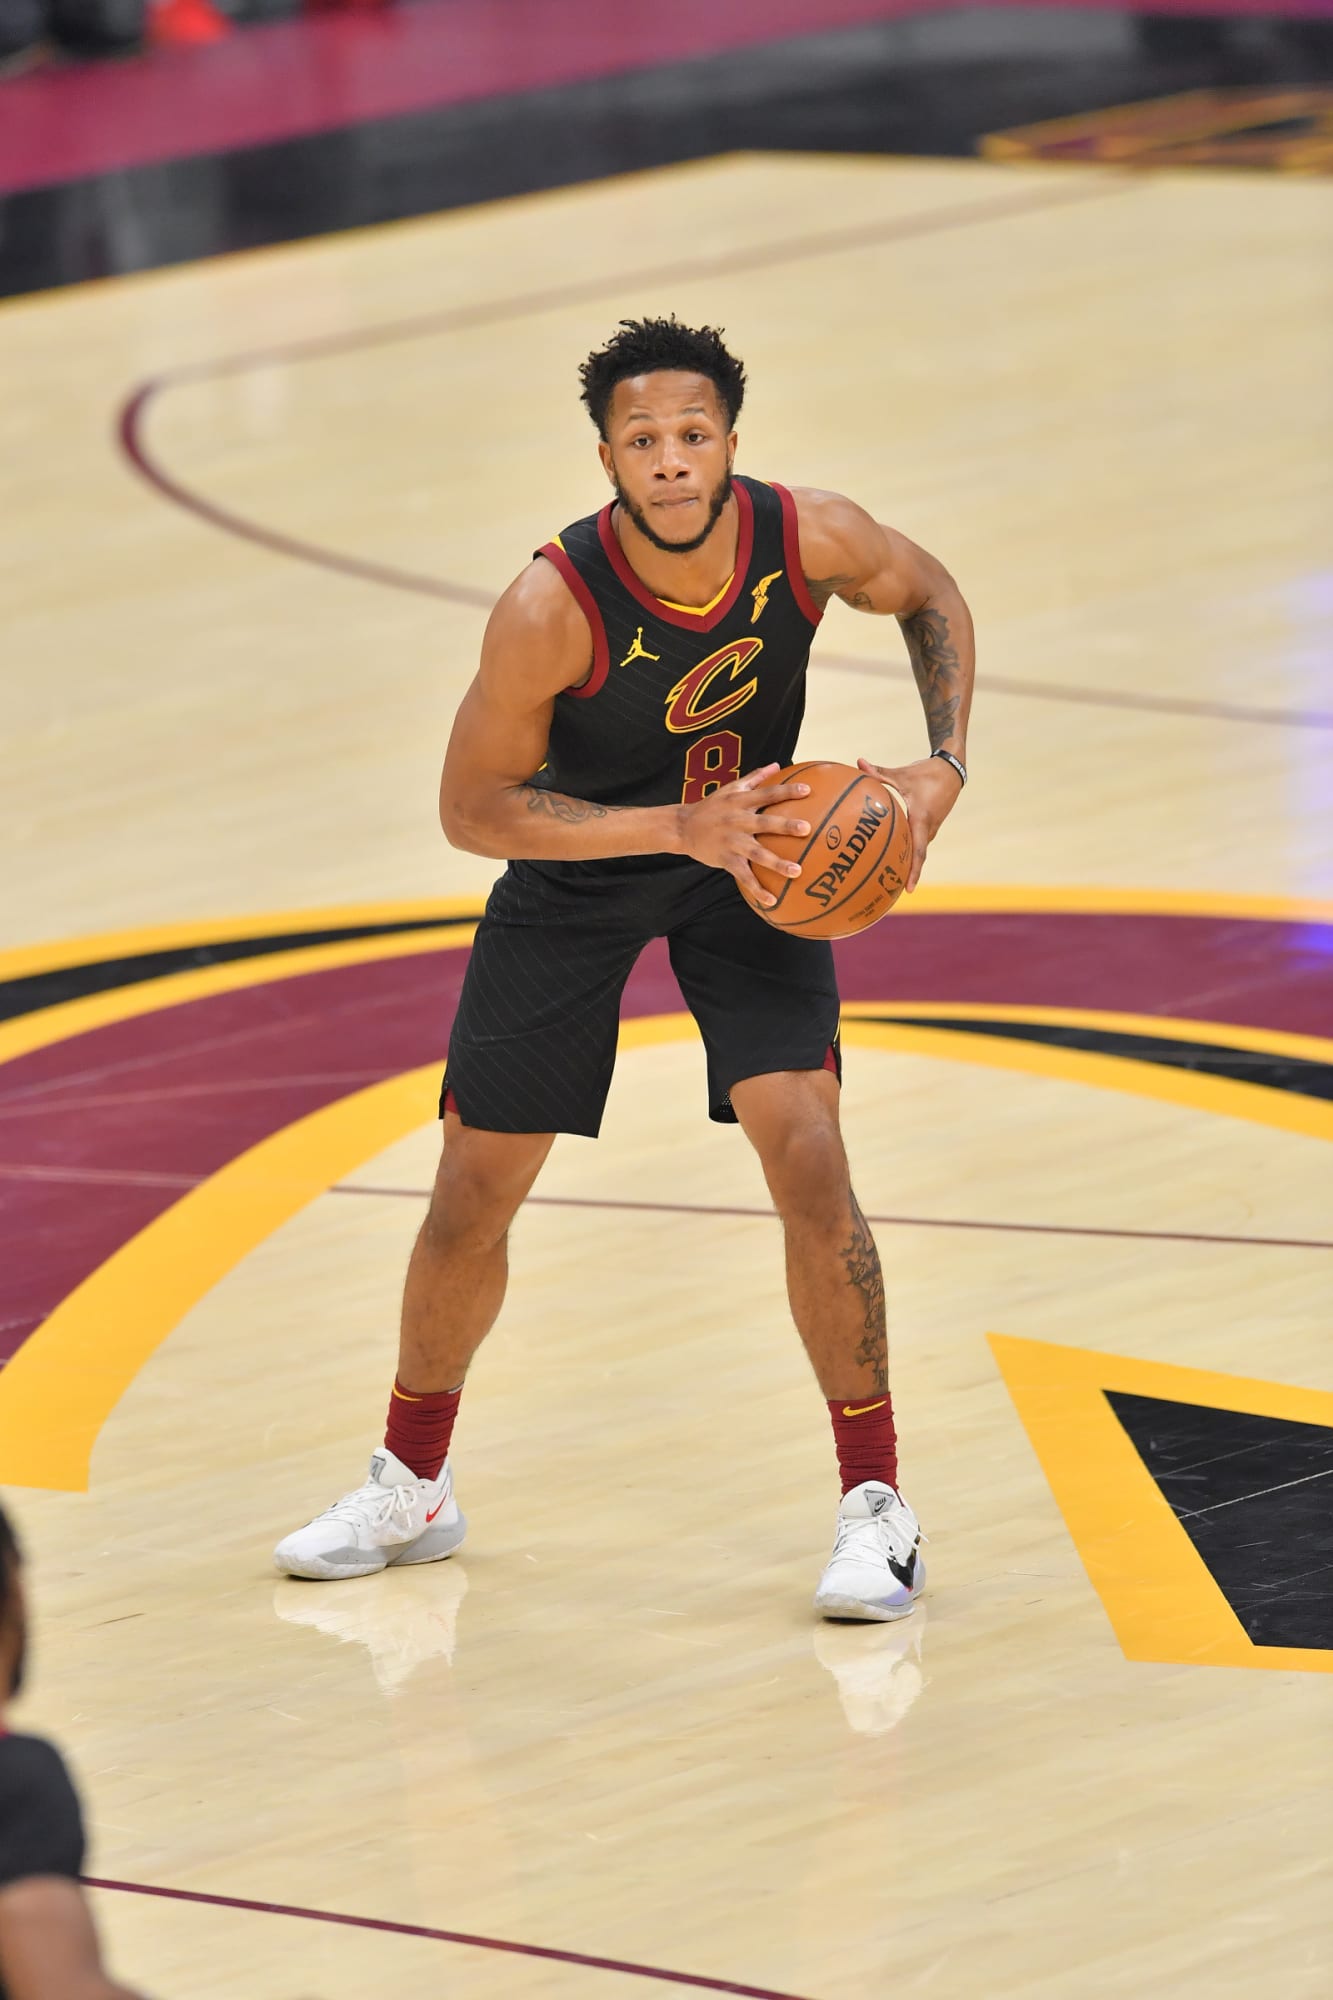 That dog impact': How Lamar Stevens is embracing his role as Cavs' starter  - The Athletic